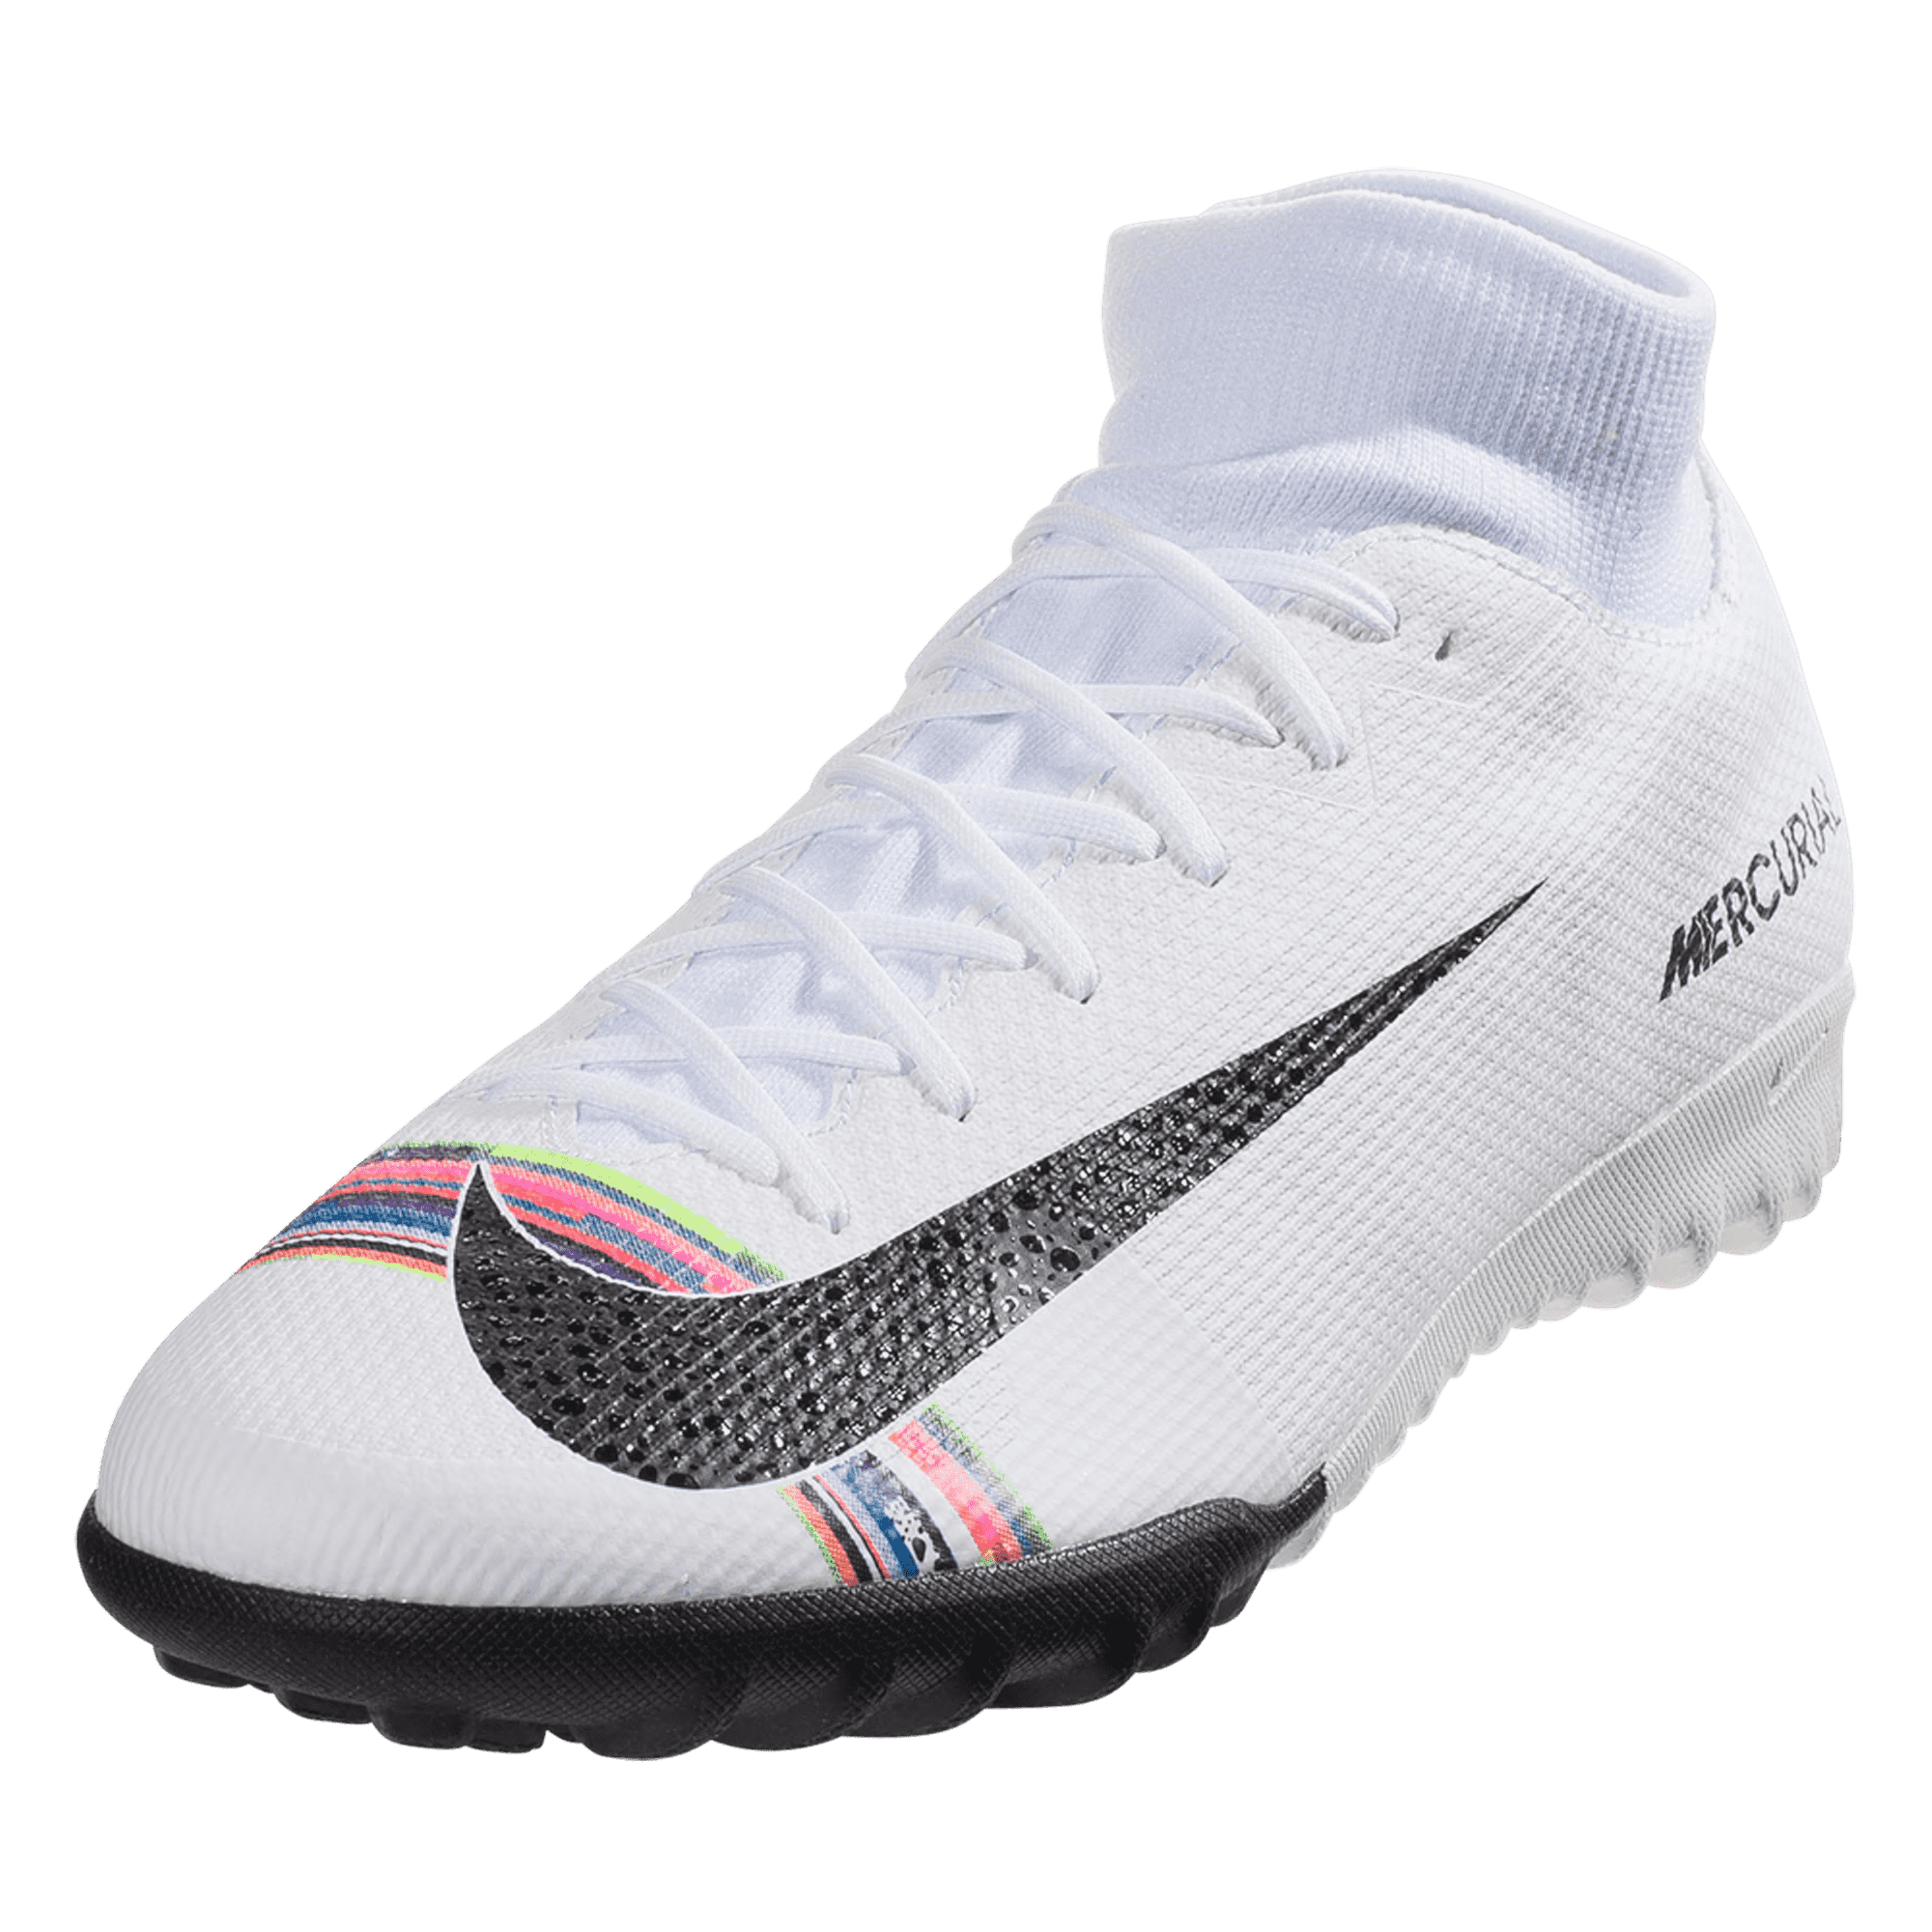 New Boots Nike Mercurial Superfly VI CR7 'Lvl Up' 2019